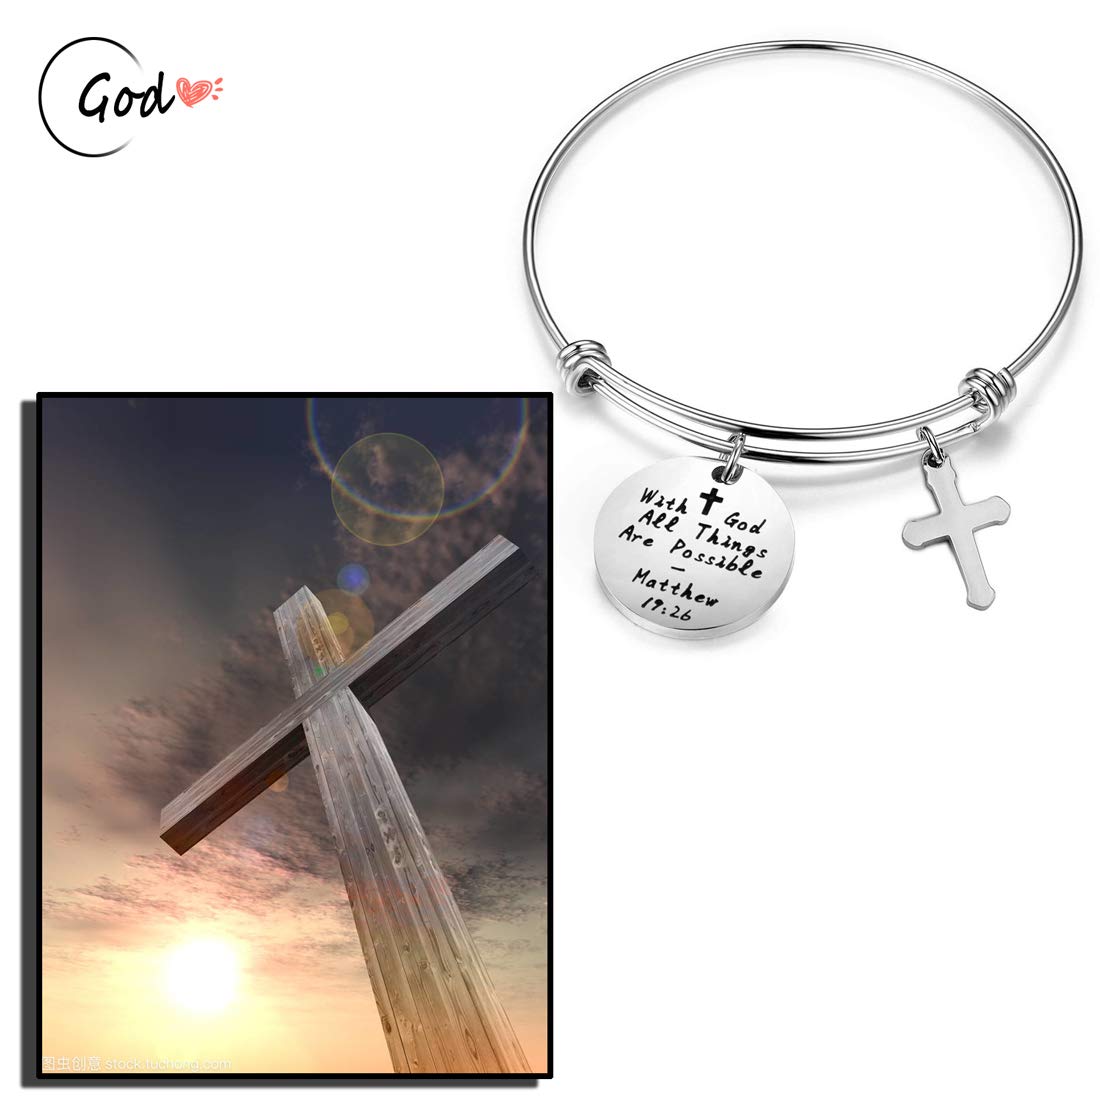 WUSUANED With God All Things are Possible Infinity Cross Necklace Bracelet Religious Jewelry Inspirational Gift